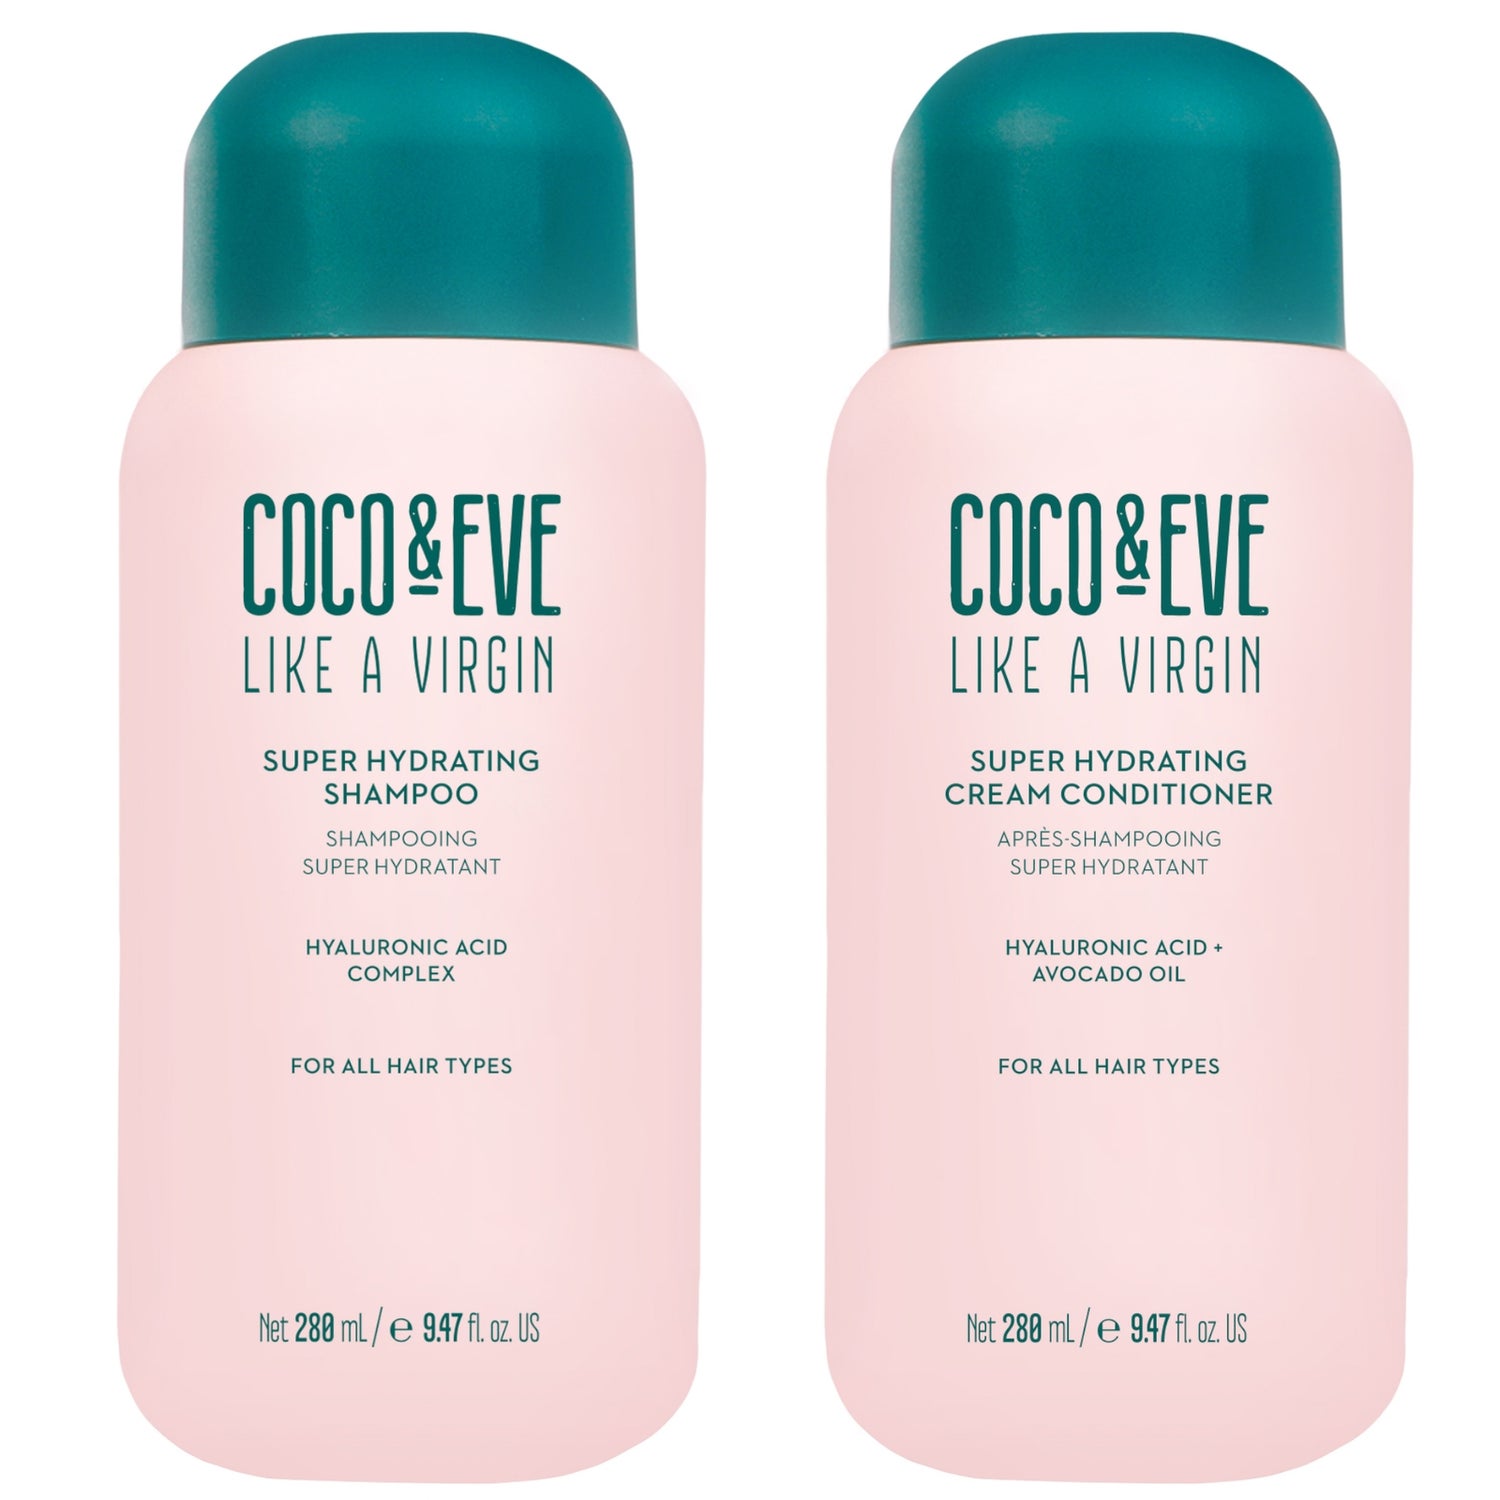 Coco & Eve Super Hydration Duo Kit (Worth £46.00)